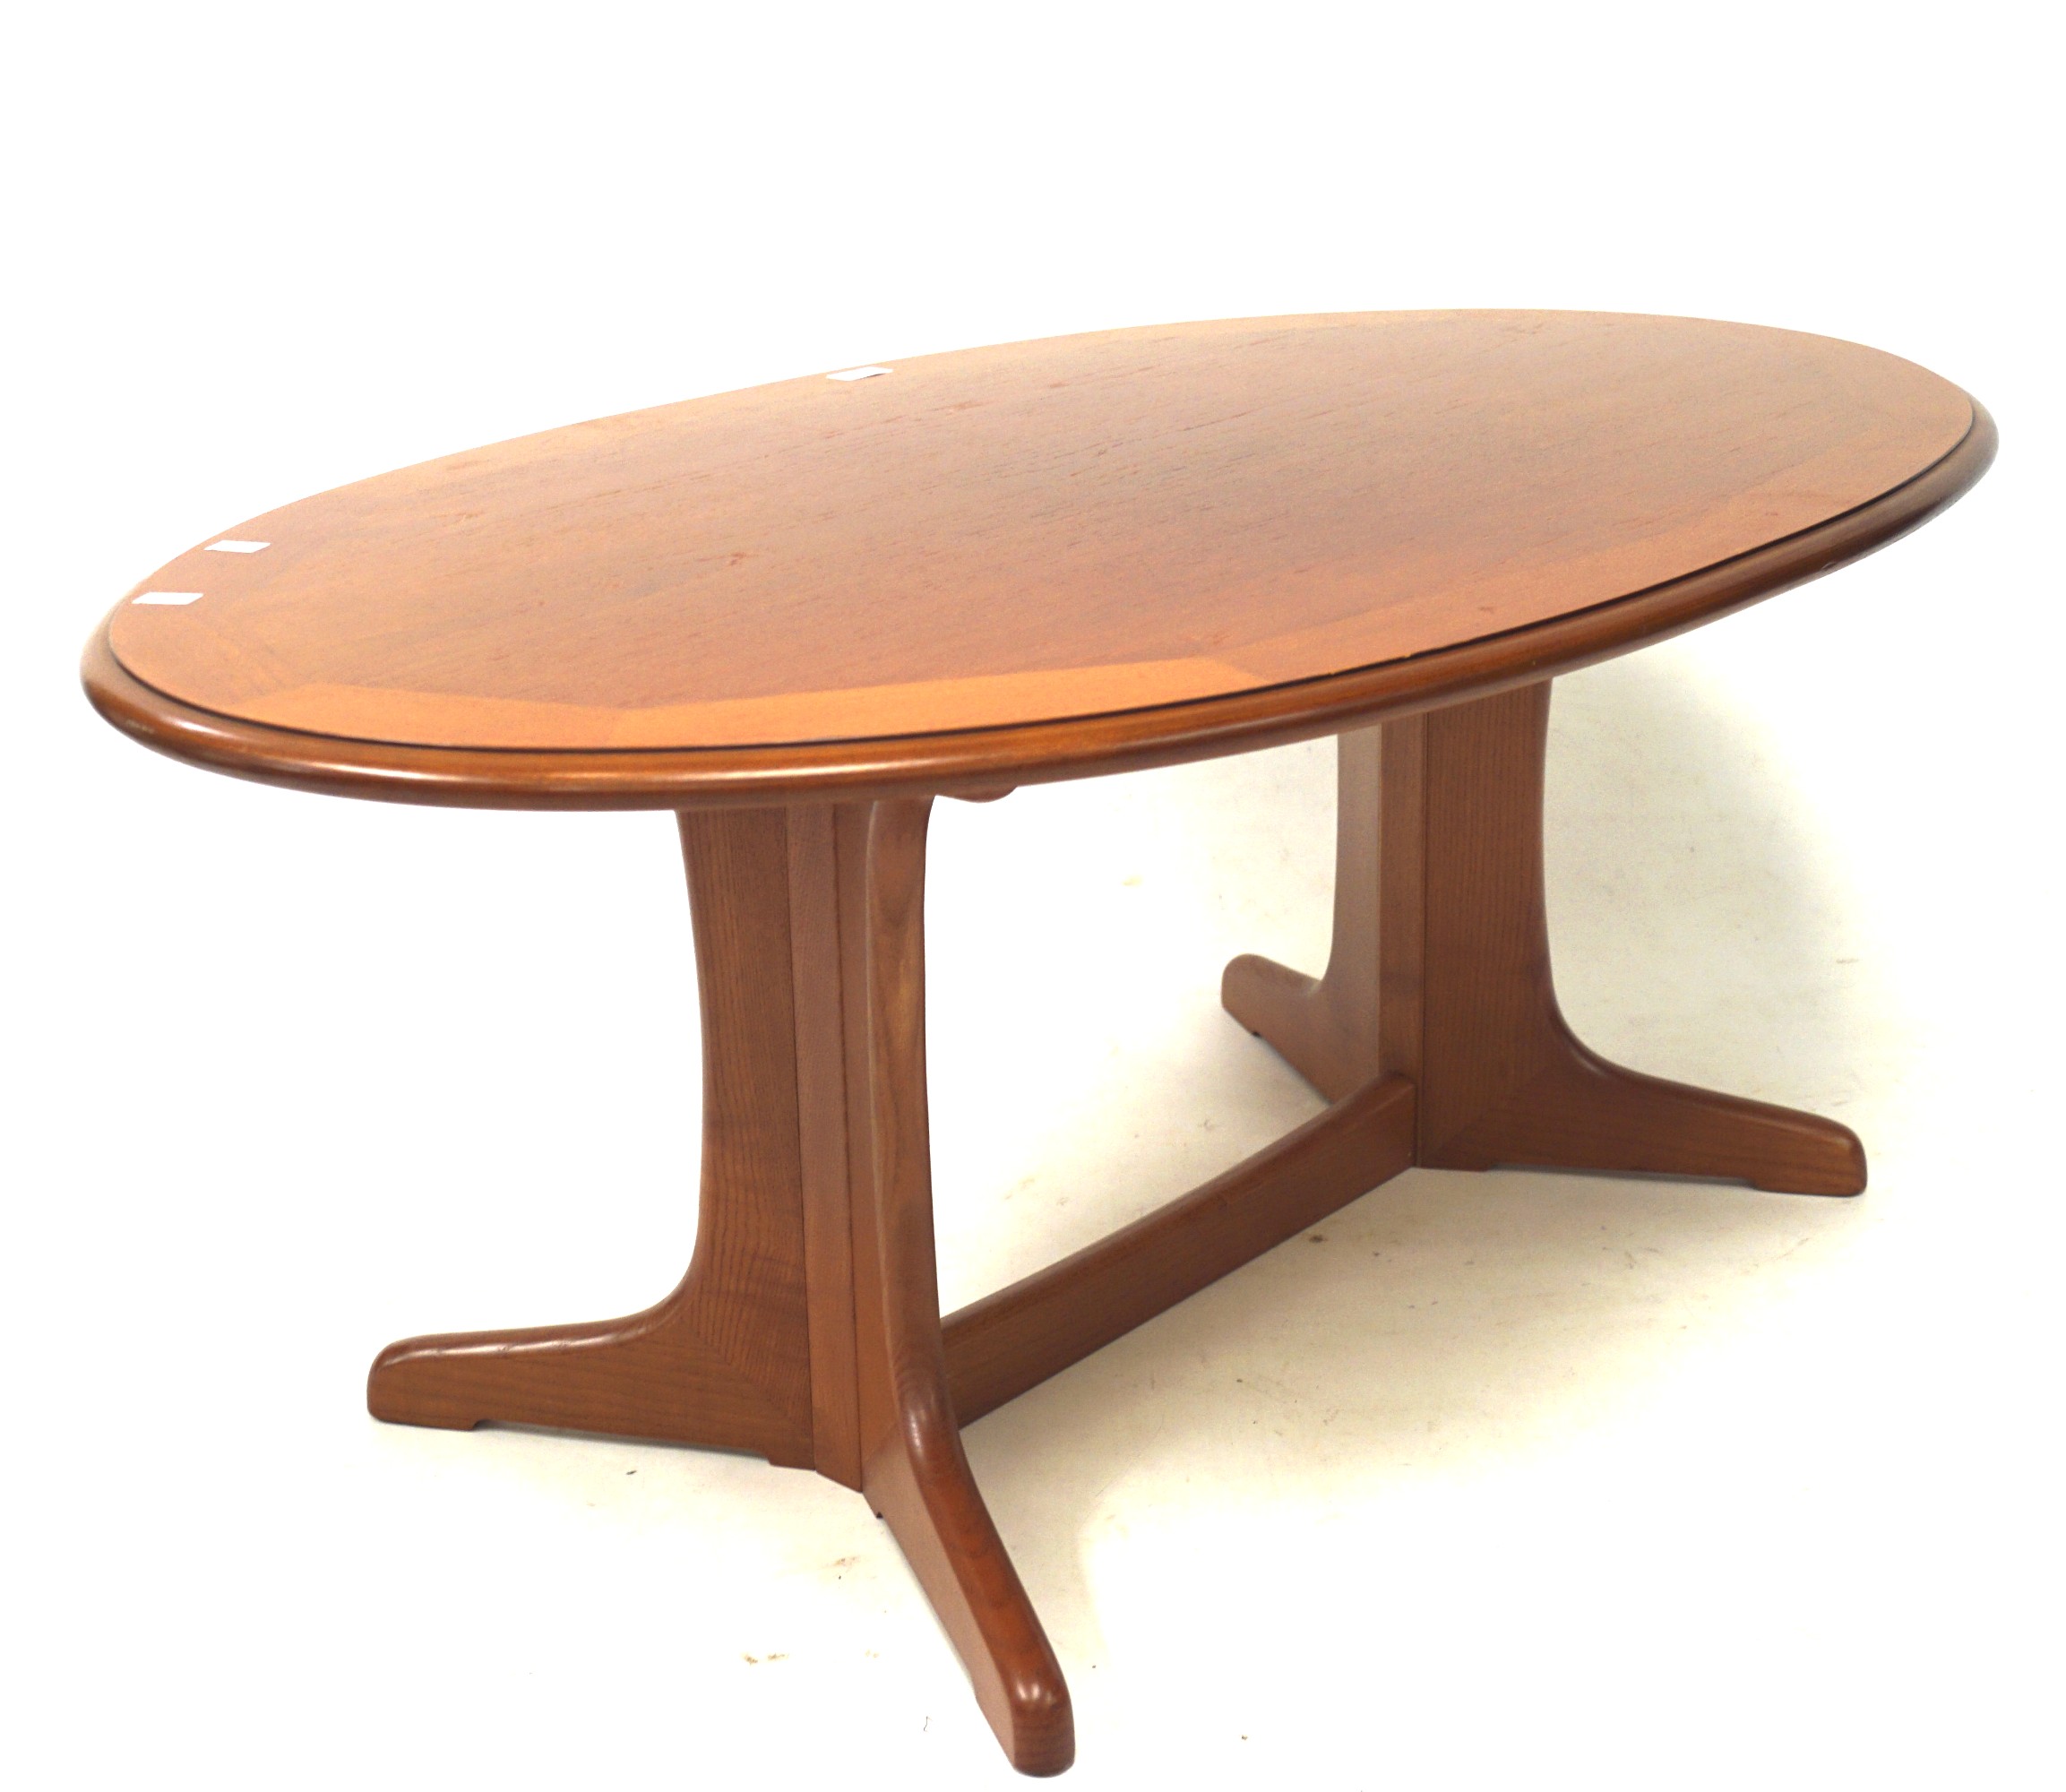 A vintage G-plan coffee table.